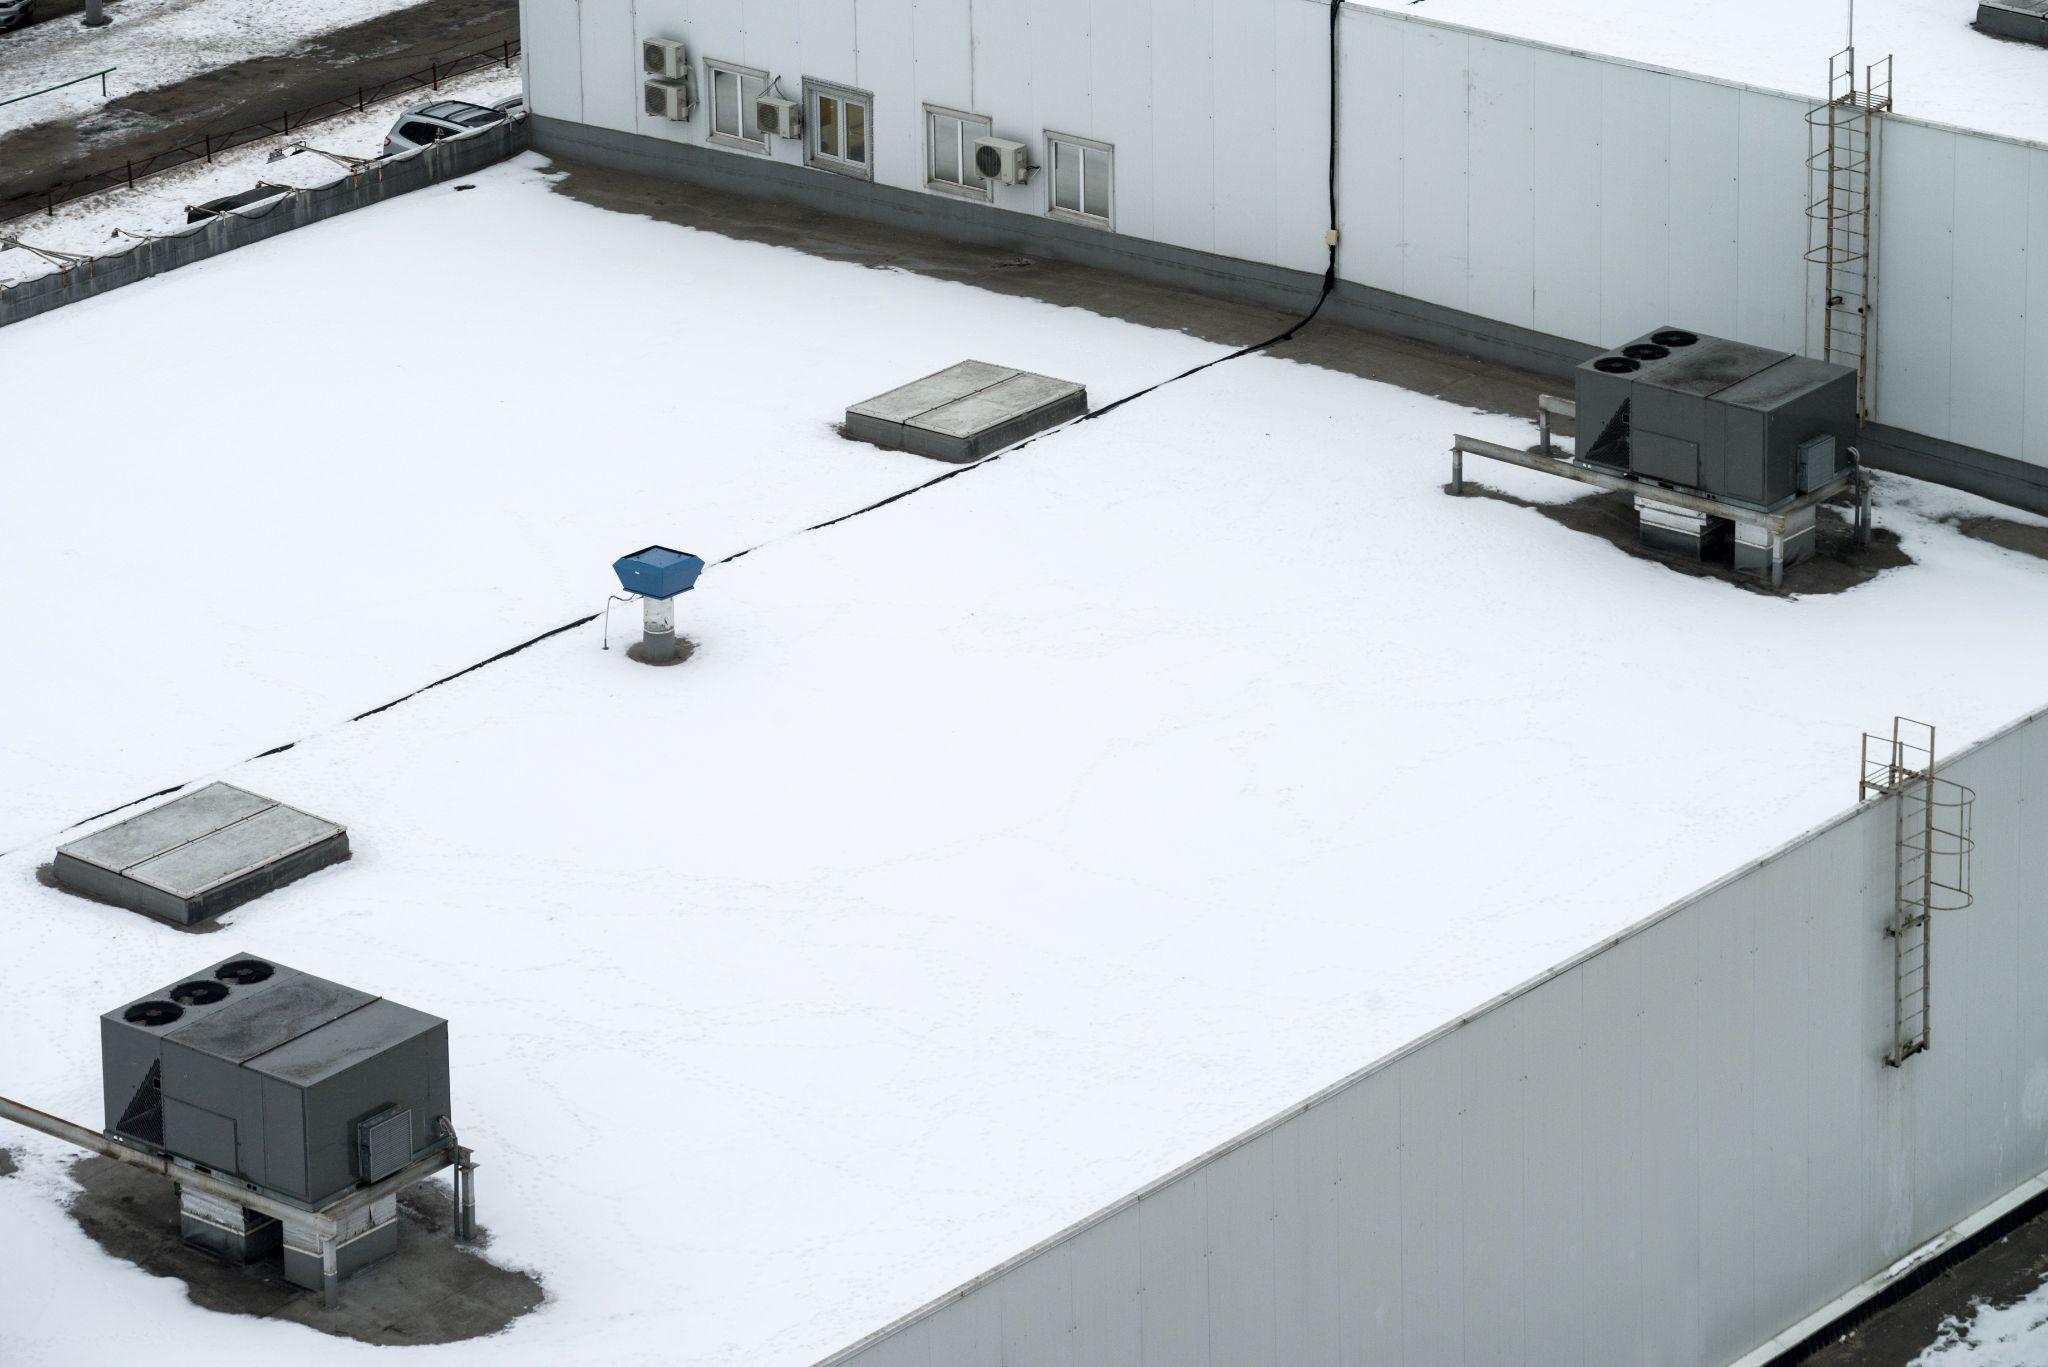 How Snow & Ice Affect Your Commercial Roof